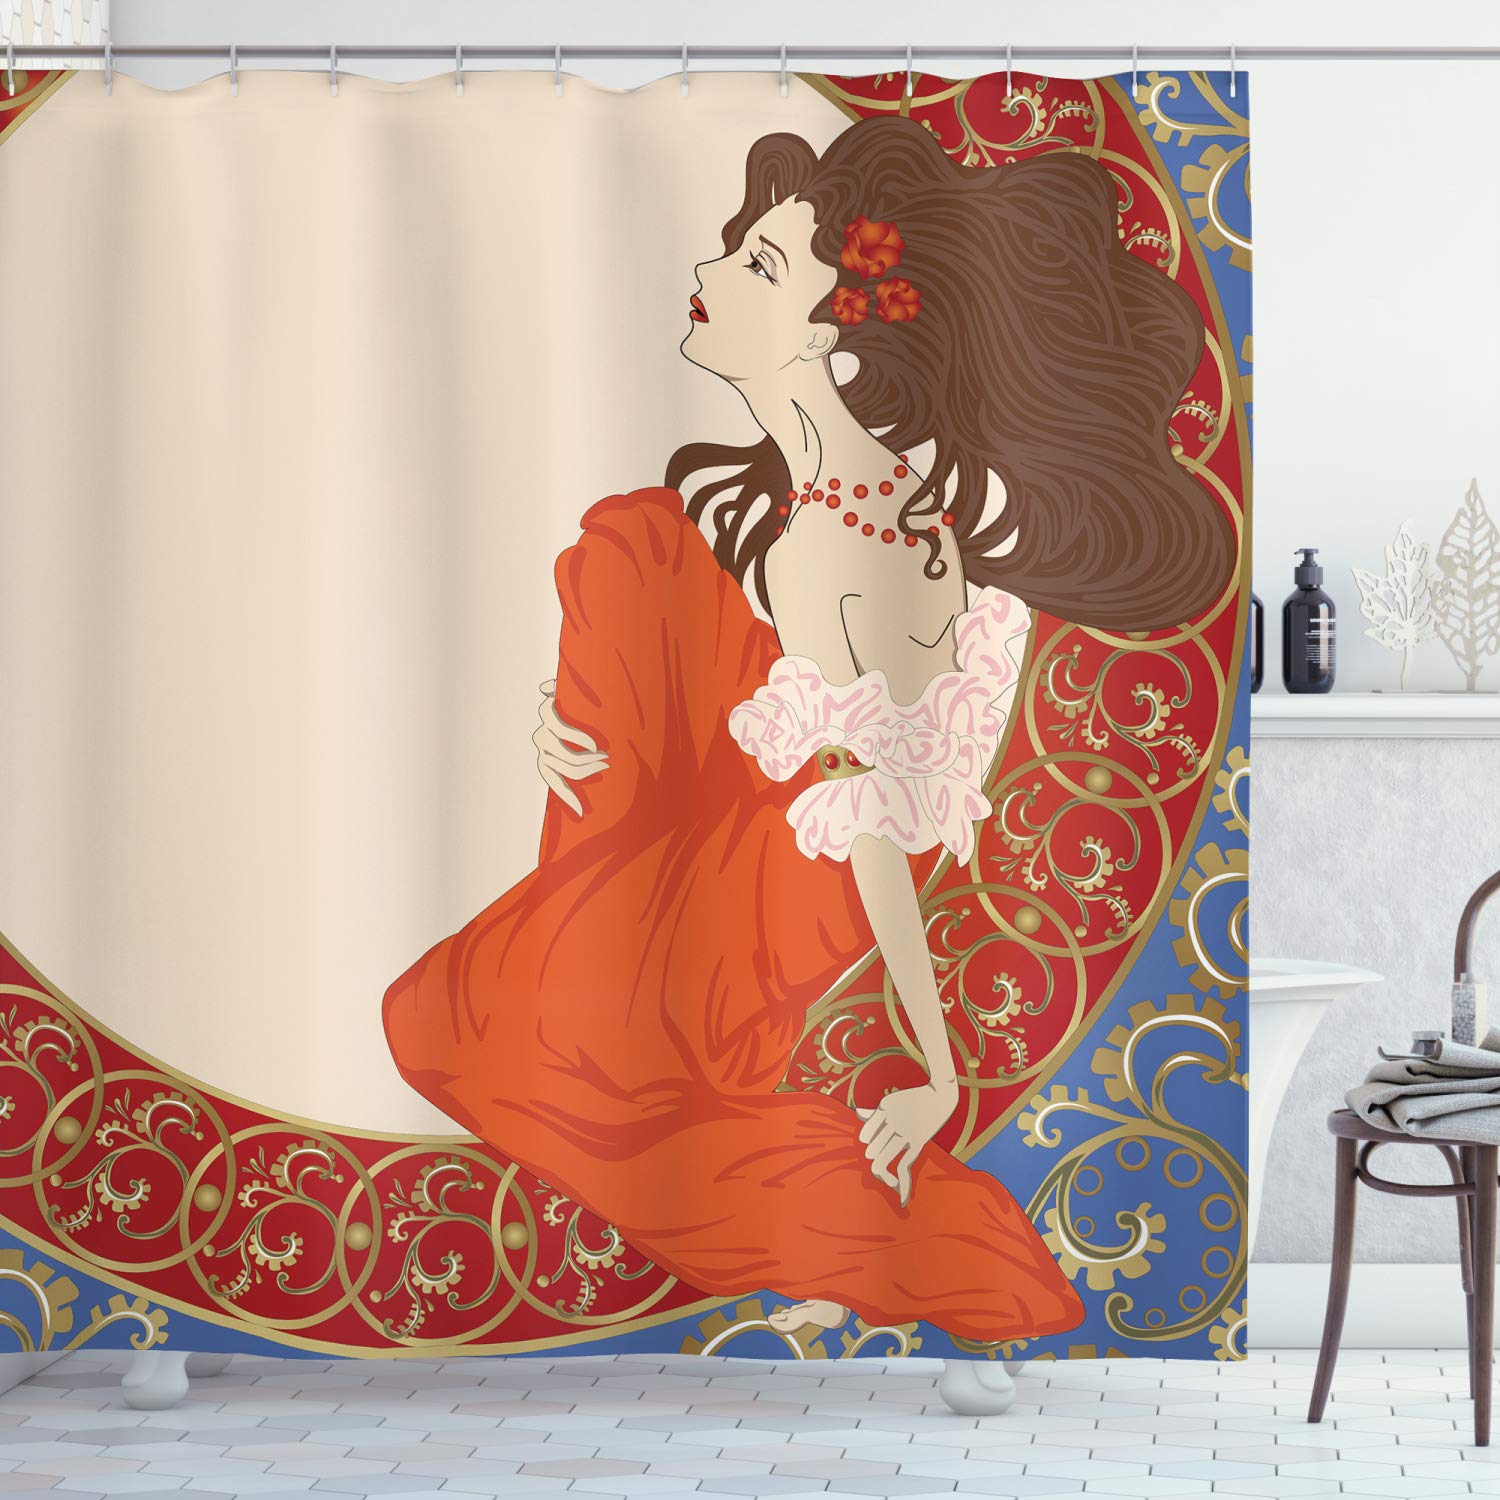 Ambesonne Art Nouveau Shower Curtain, Antique Woman in an Old Fashioned Medieval Dress Floral Rich Framework Print, Cloth Fabric Bathroom Decor Set with Hooks, 84" Extra Long, Cream Orange